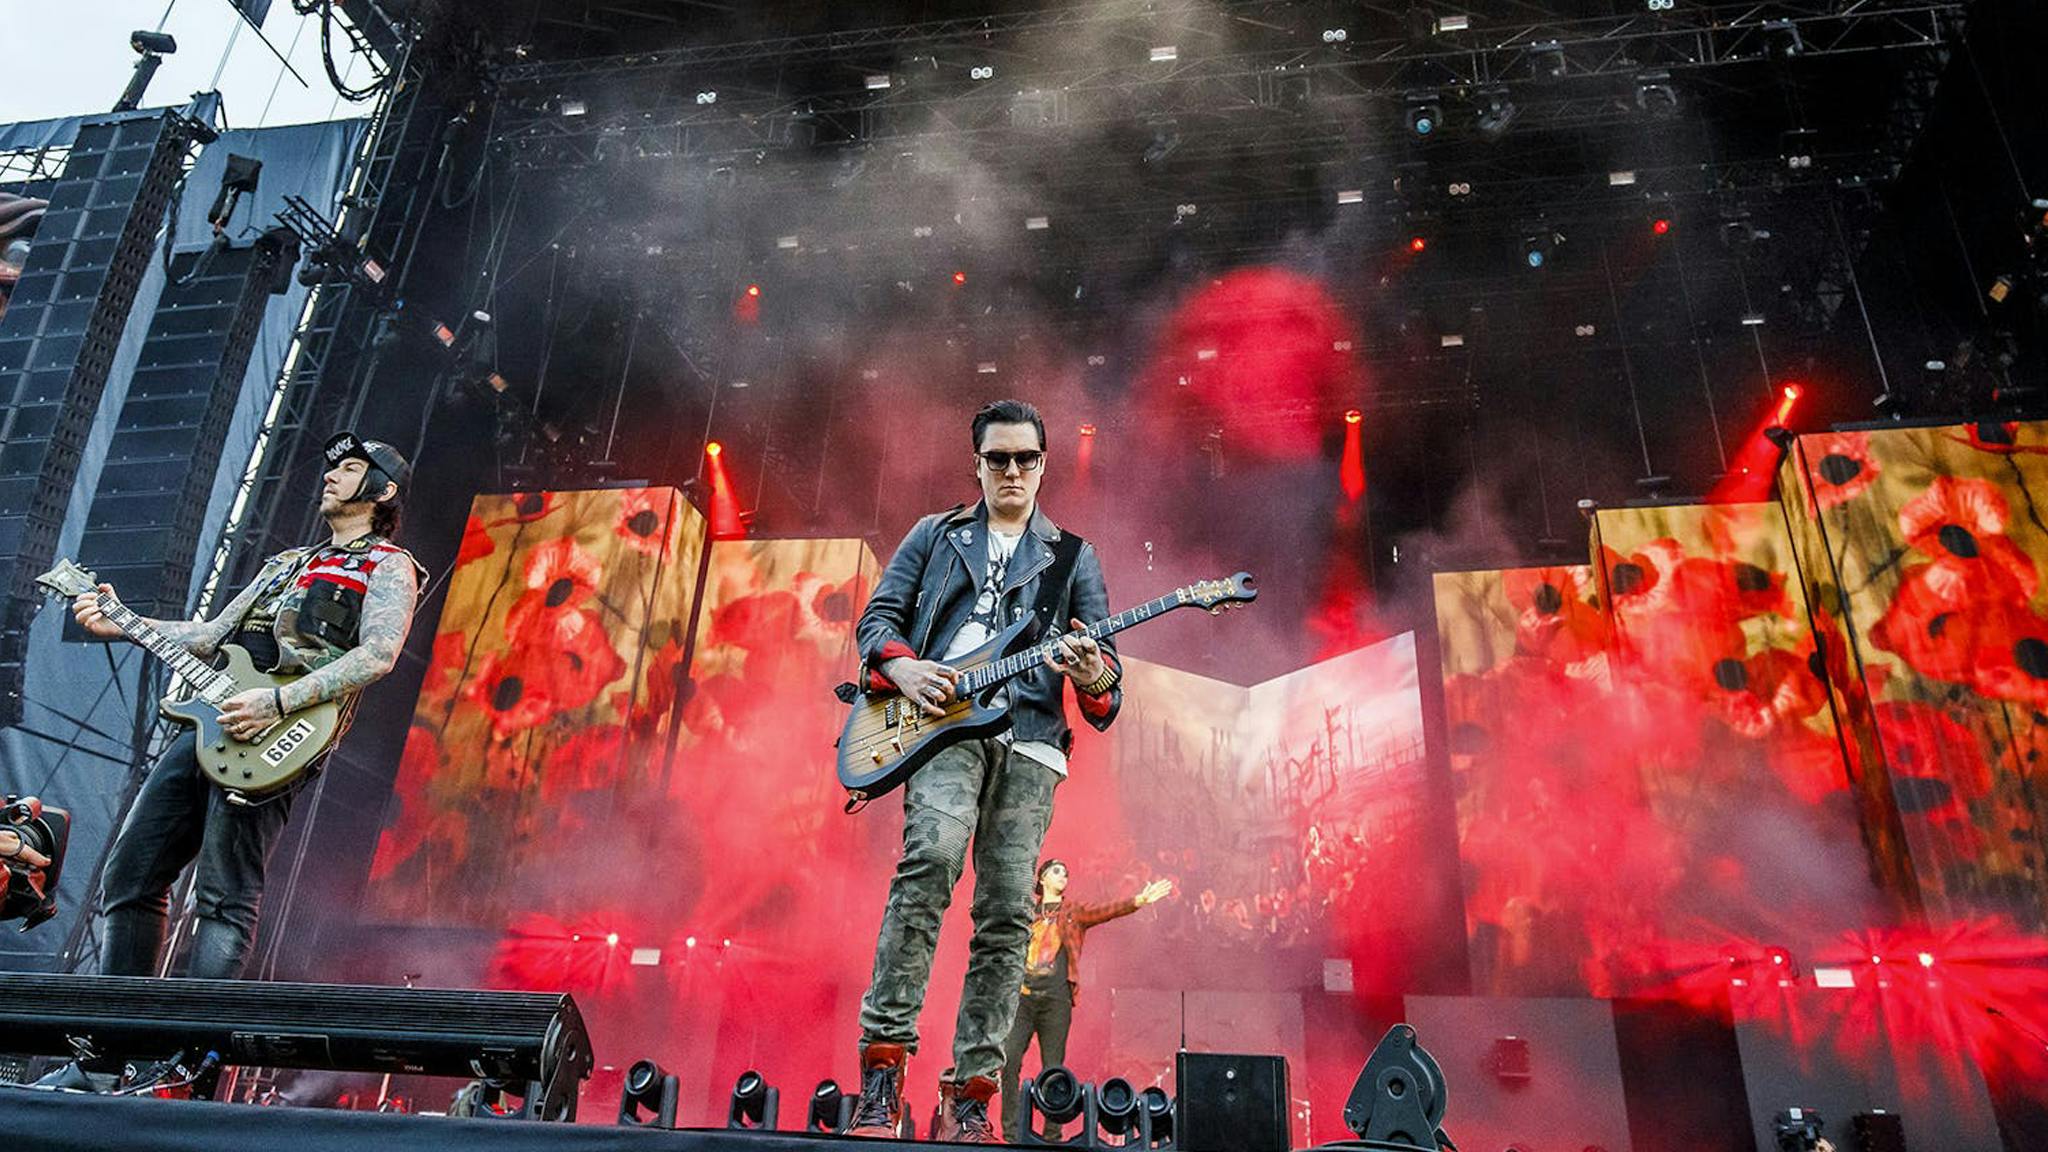 Avenged Sevenfold’s Syn Gates suffered a “pretty severe” leg injury onstage, but band won’t cancel shows